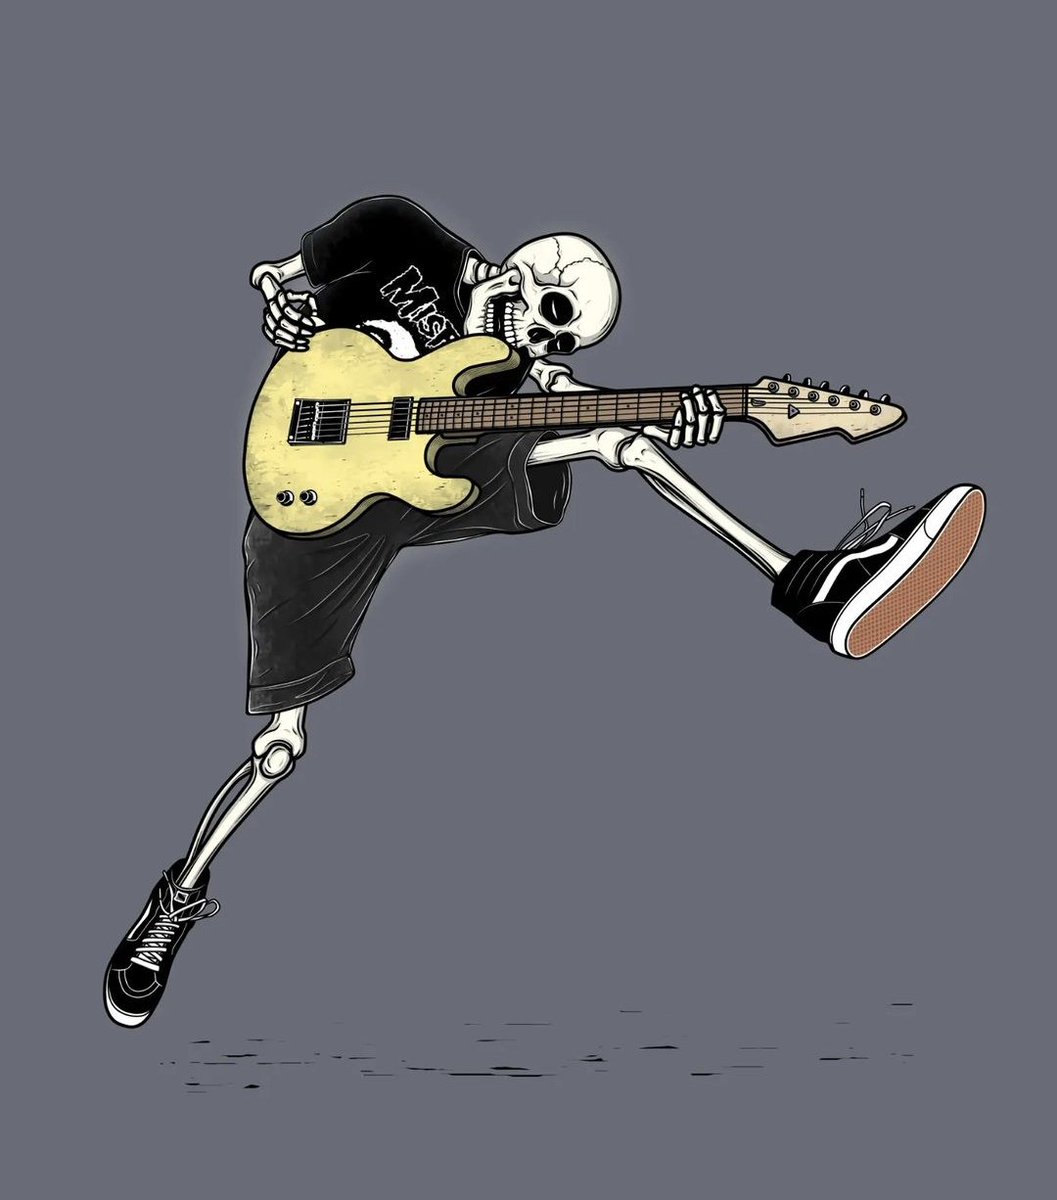 Rock Out

#Art by Empty Graves